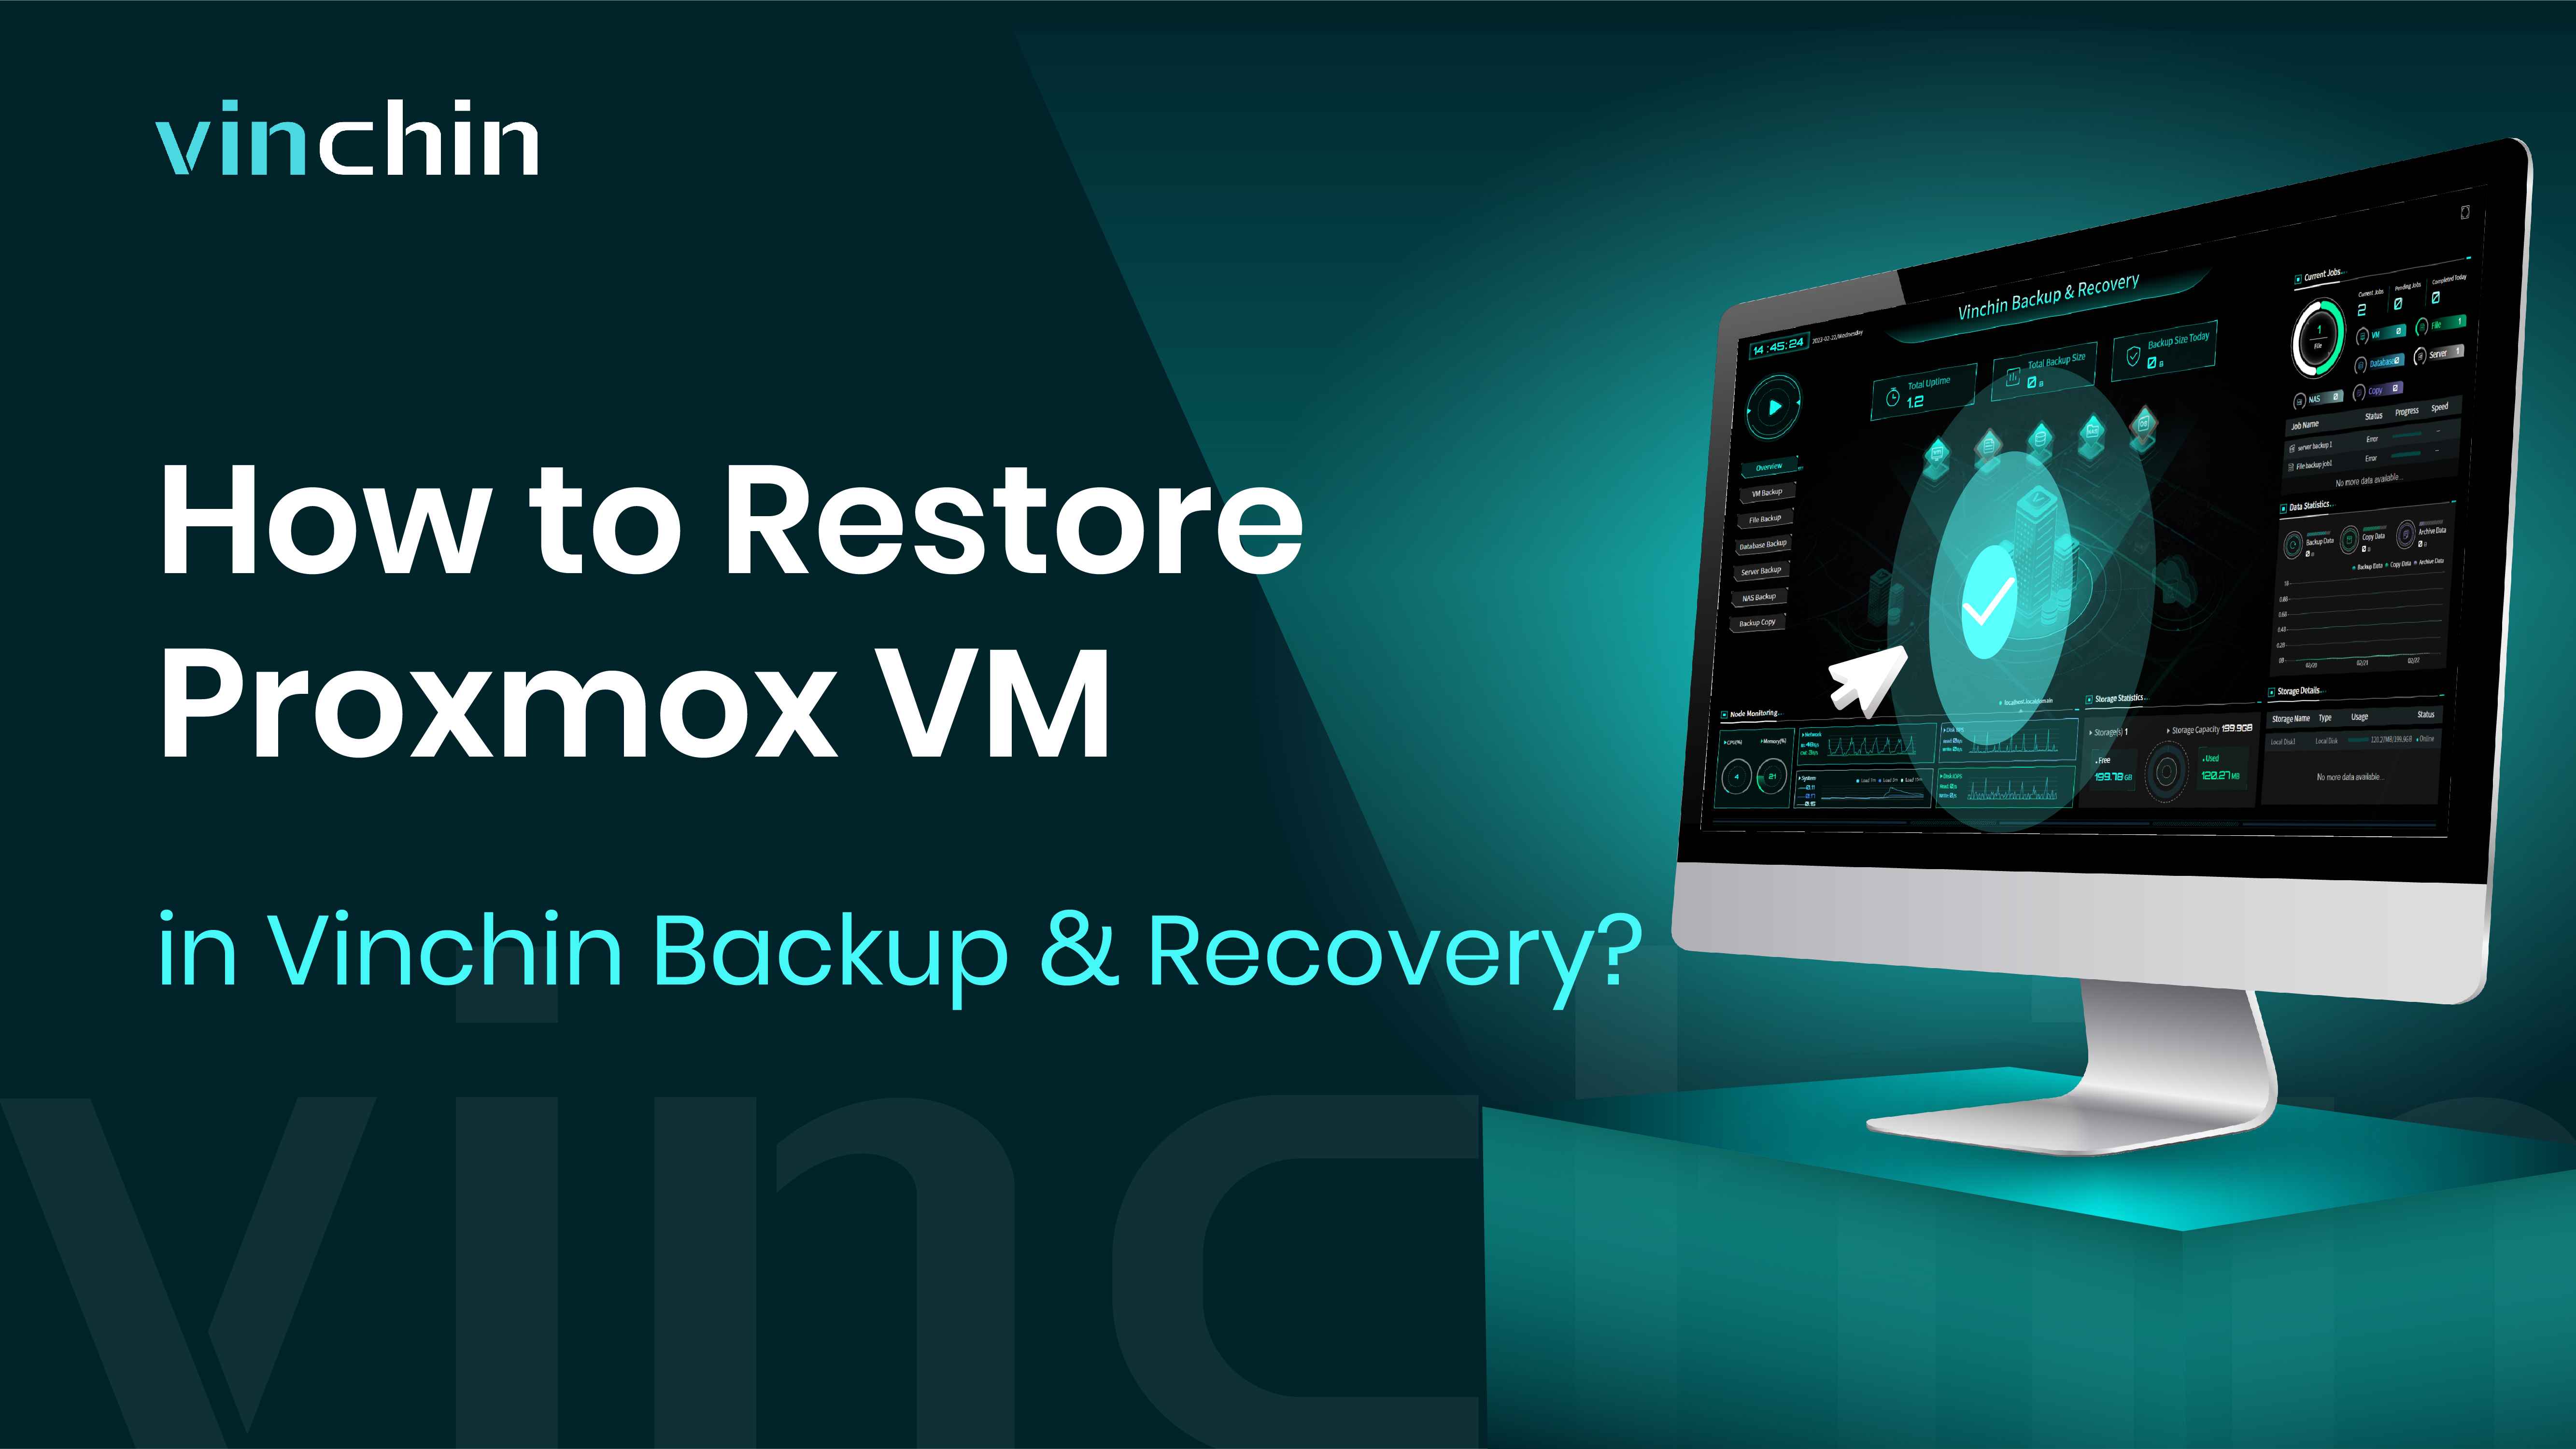  restore Proxmox VM with Vinchin Backup & Recovery 